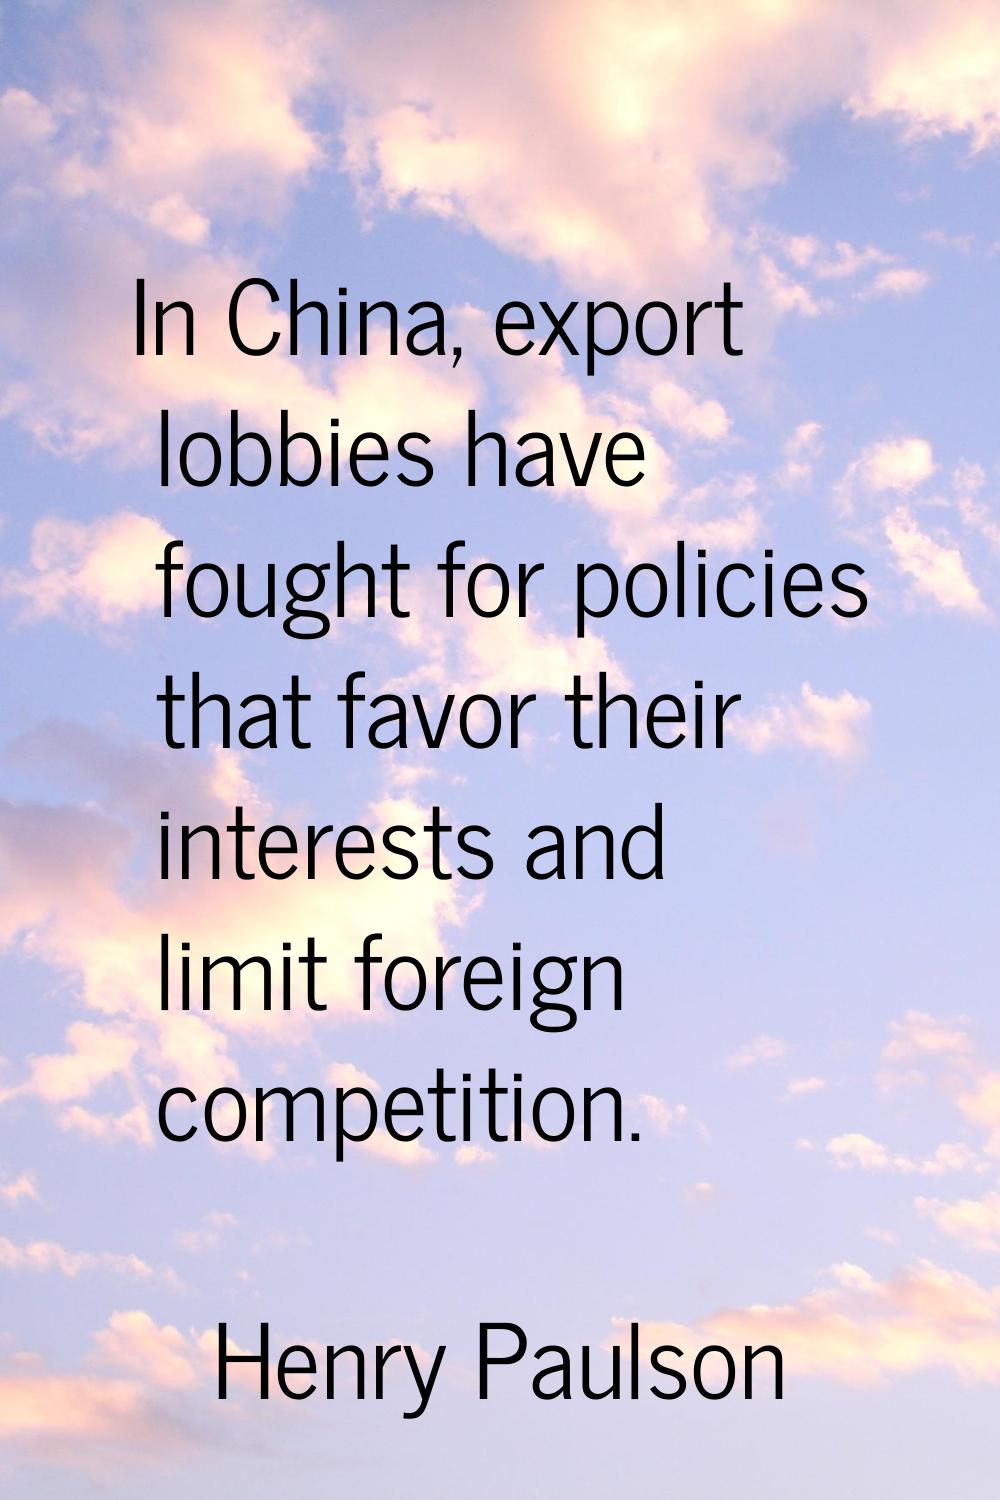 In China, export lobbies have fought for policies that favor their interests and limit foreign comp